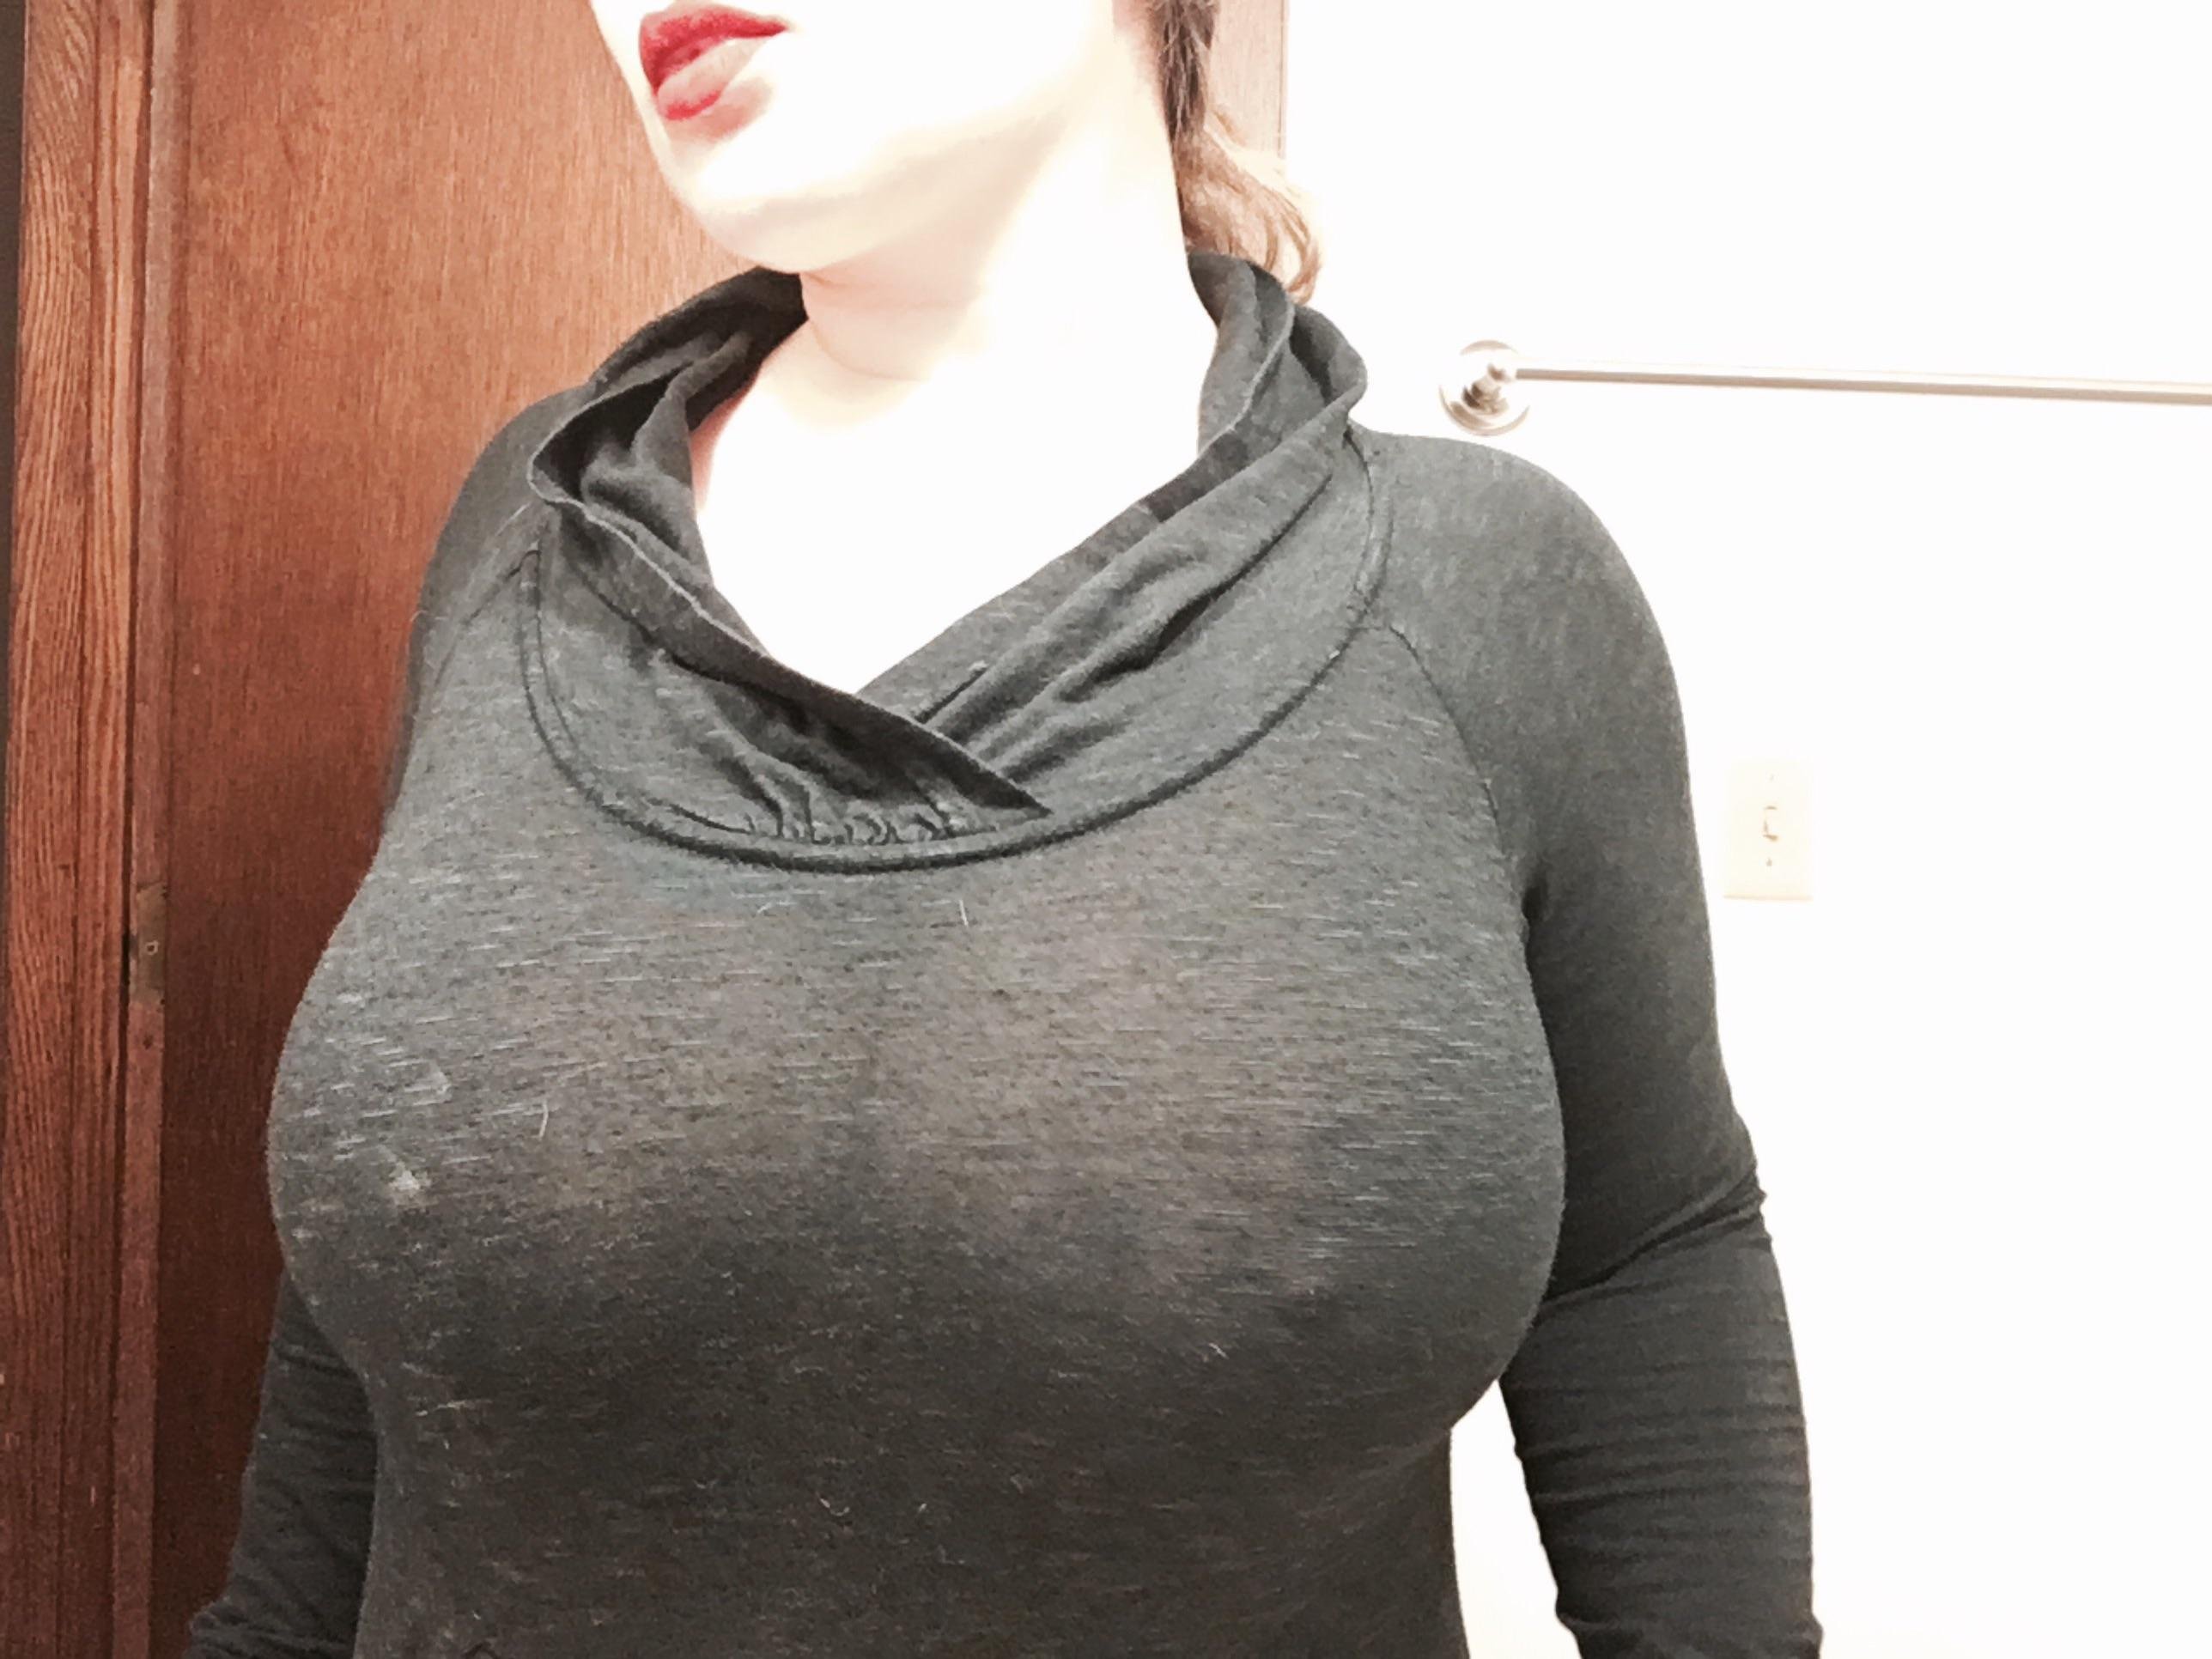 Hummm...I think I can get away without wearing a bra with this shirt.